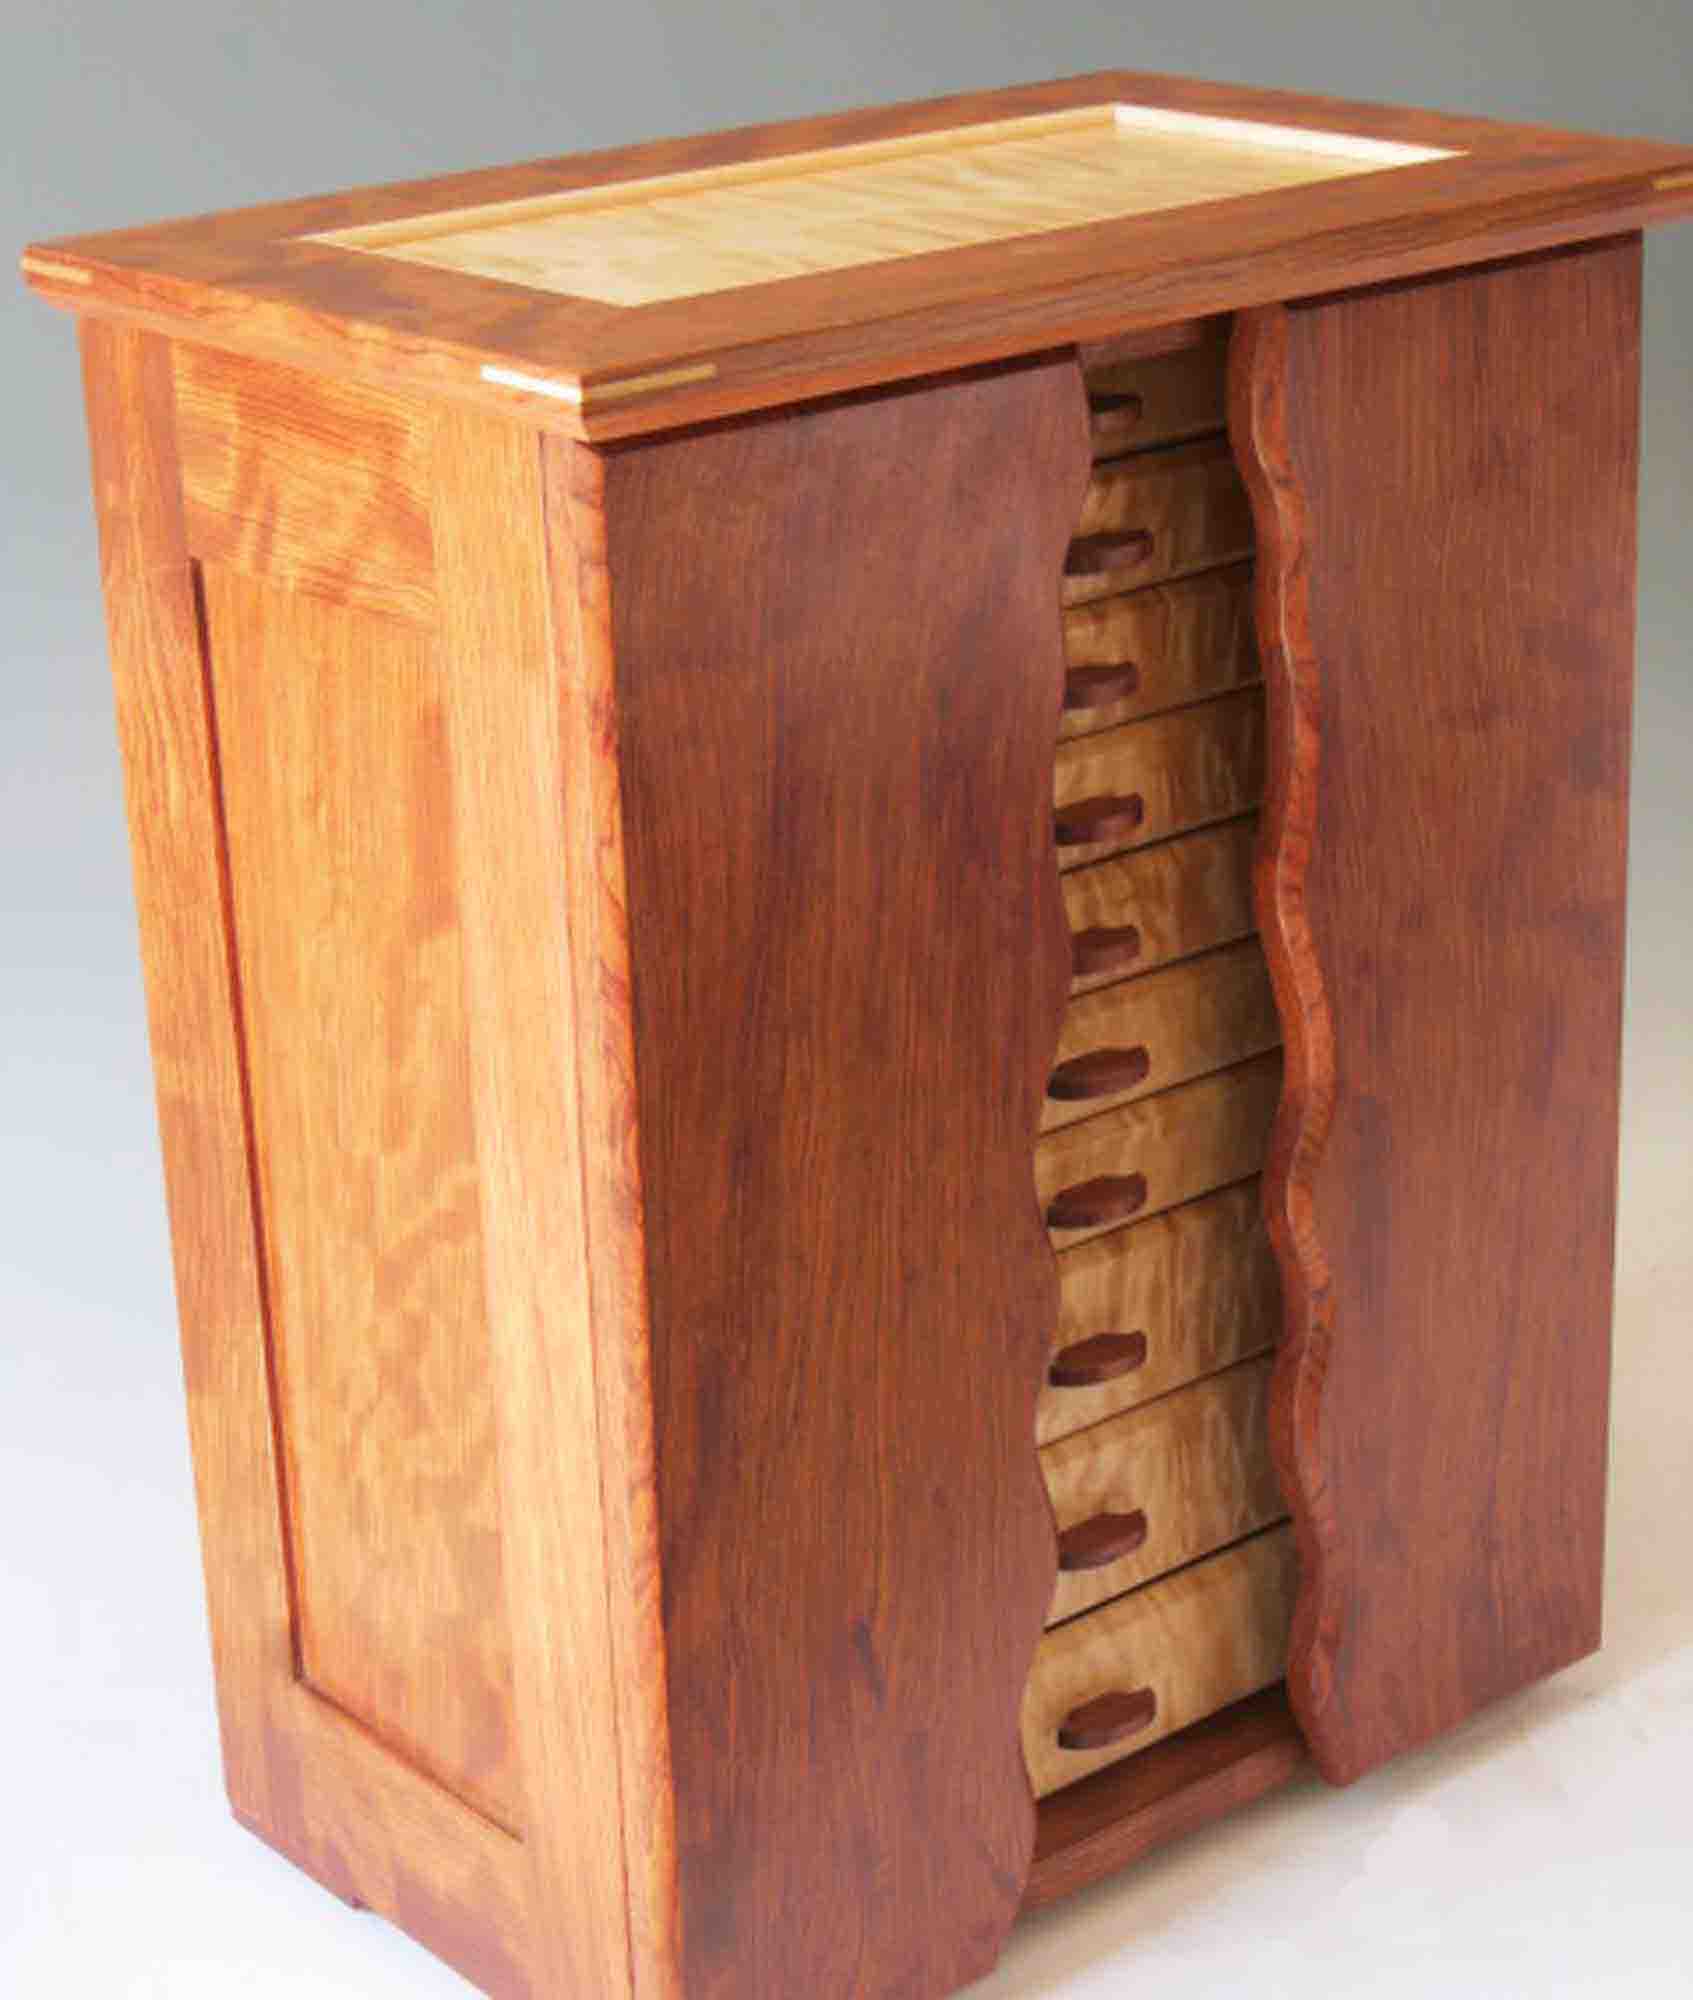 Beautiful Wooden Boxes - Crafts'man Beautiful Carving On Wooden